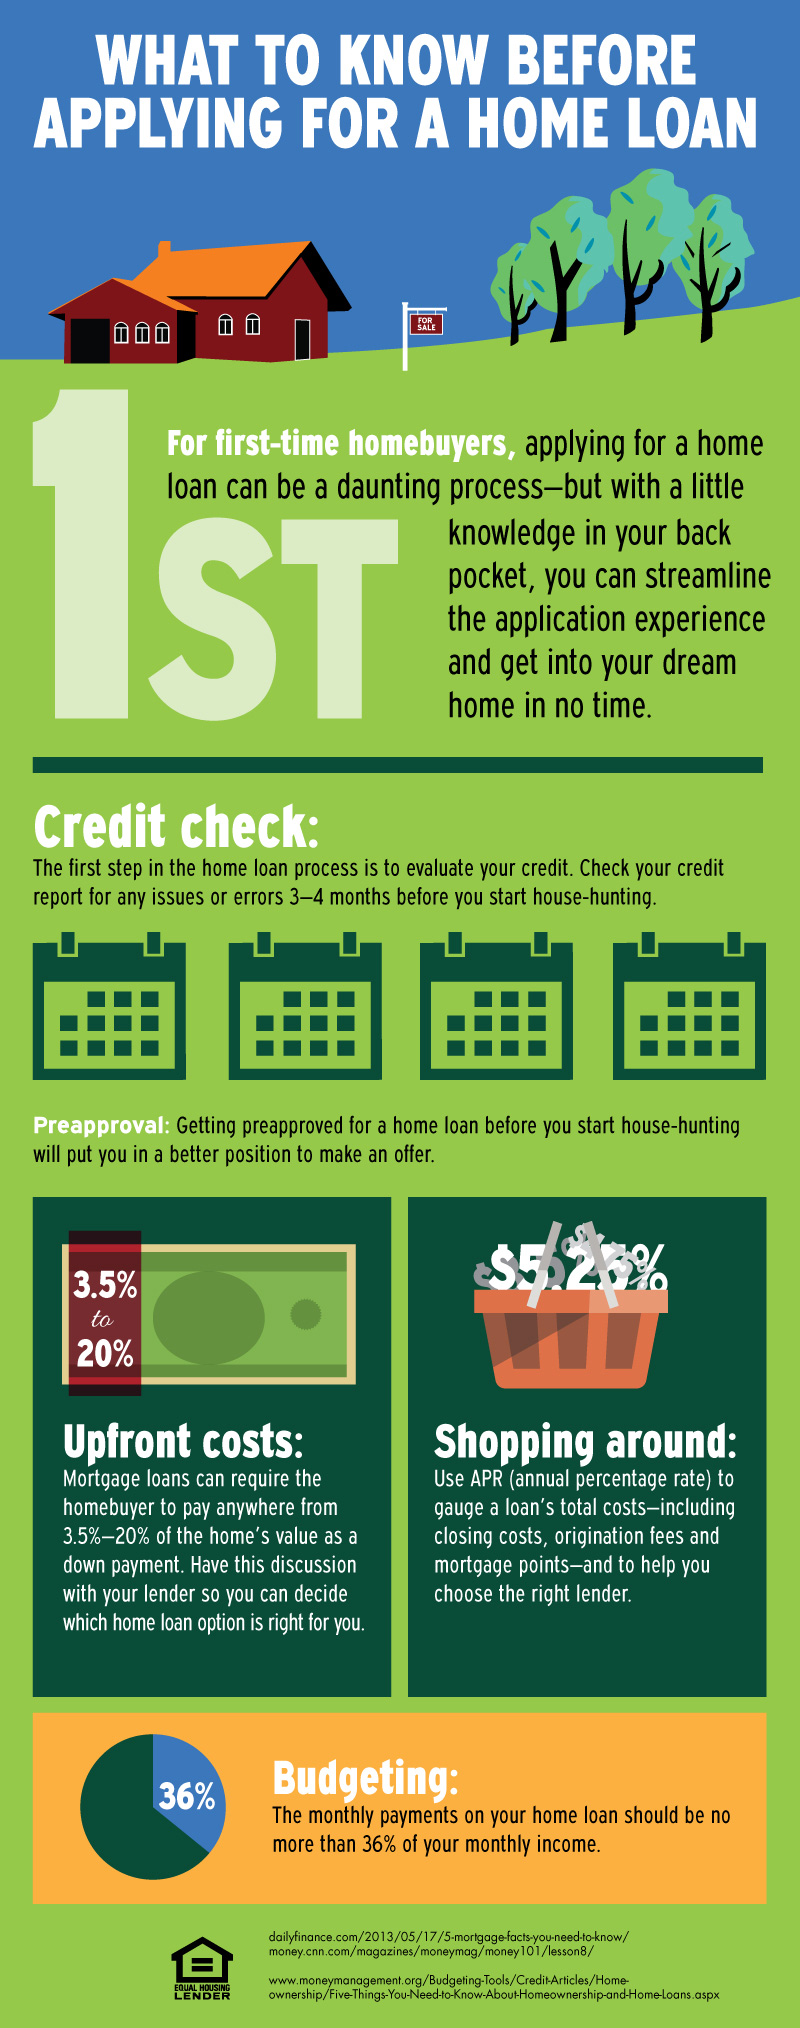 An infographic outlining home loan basics for first-time homebuyers